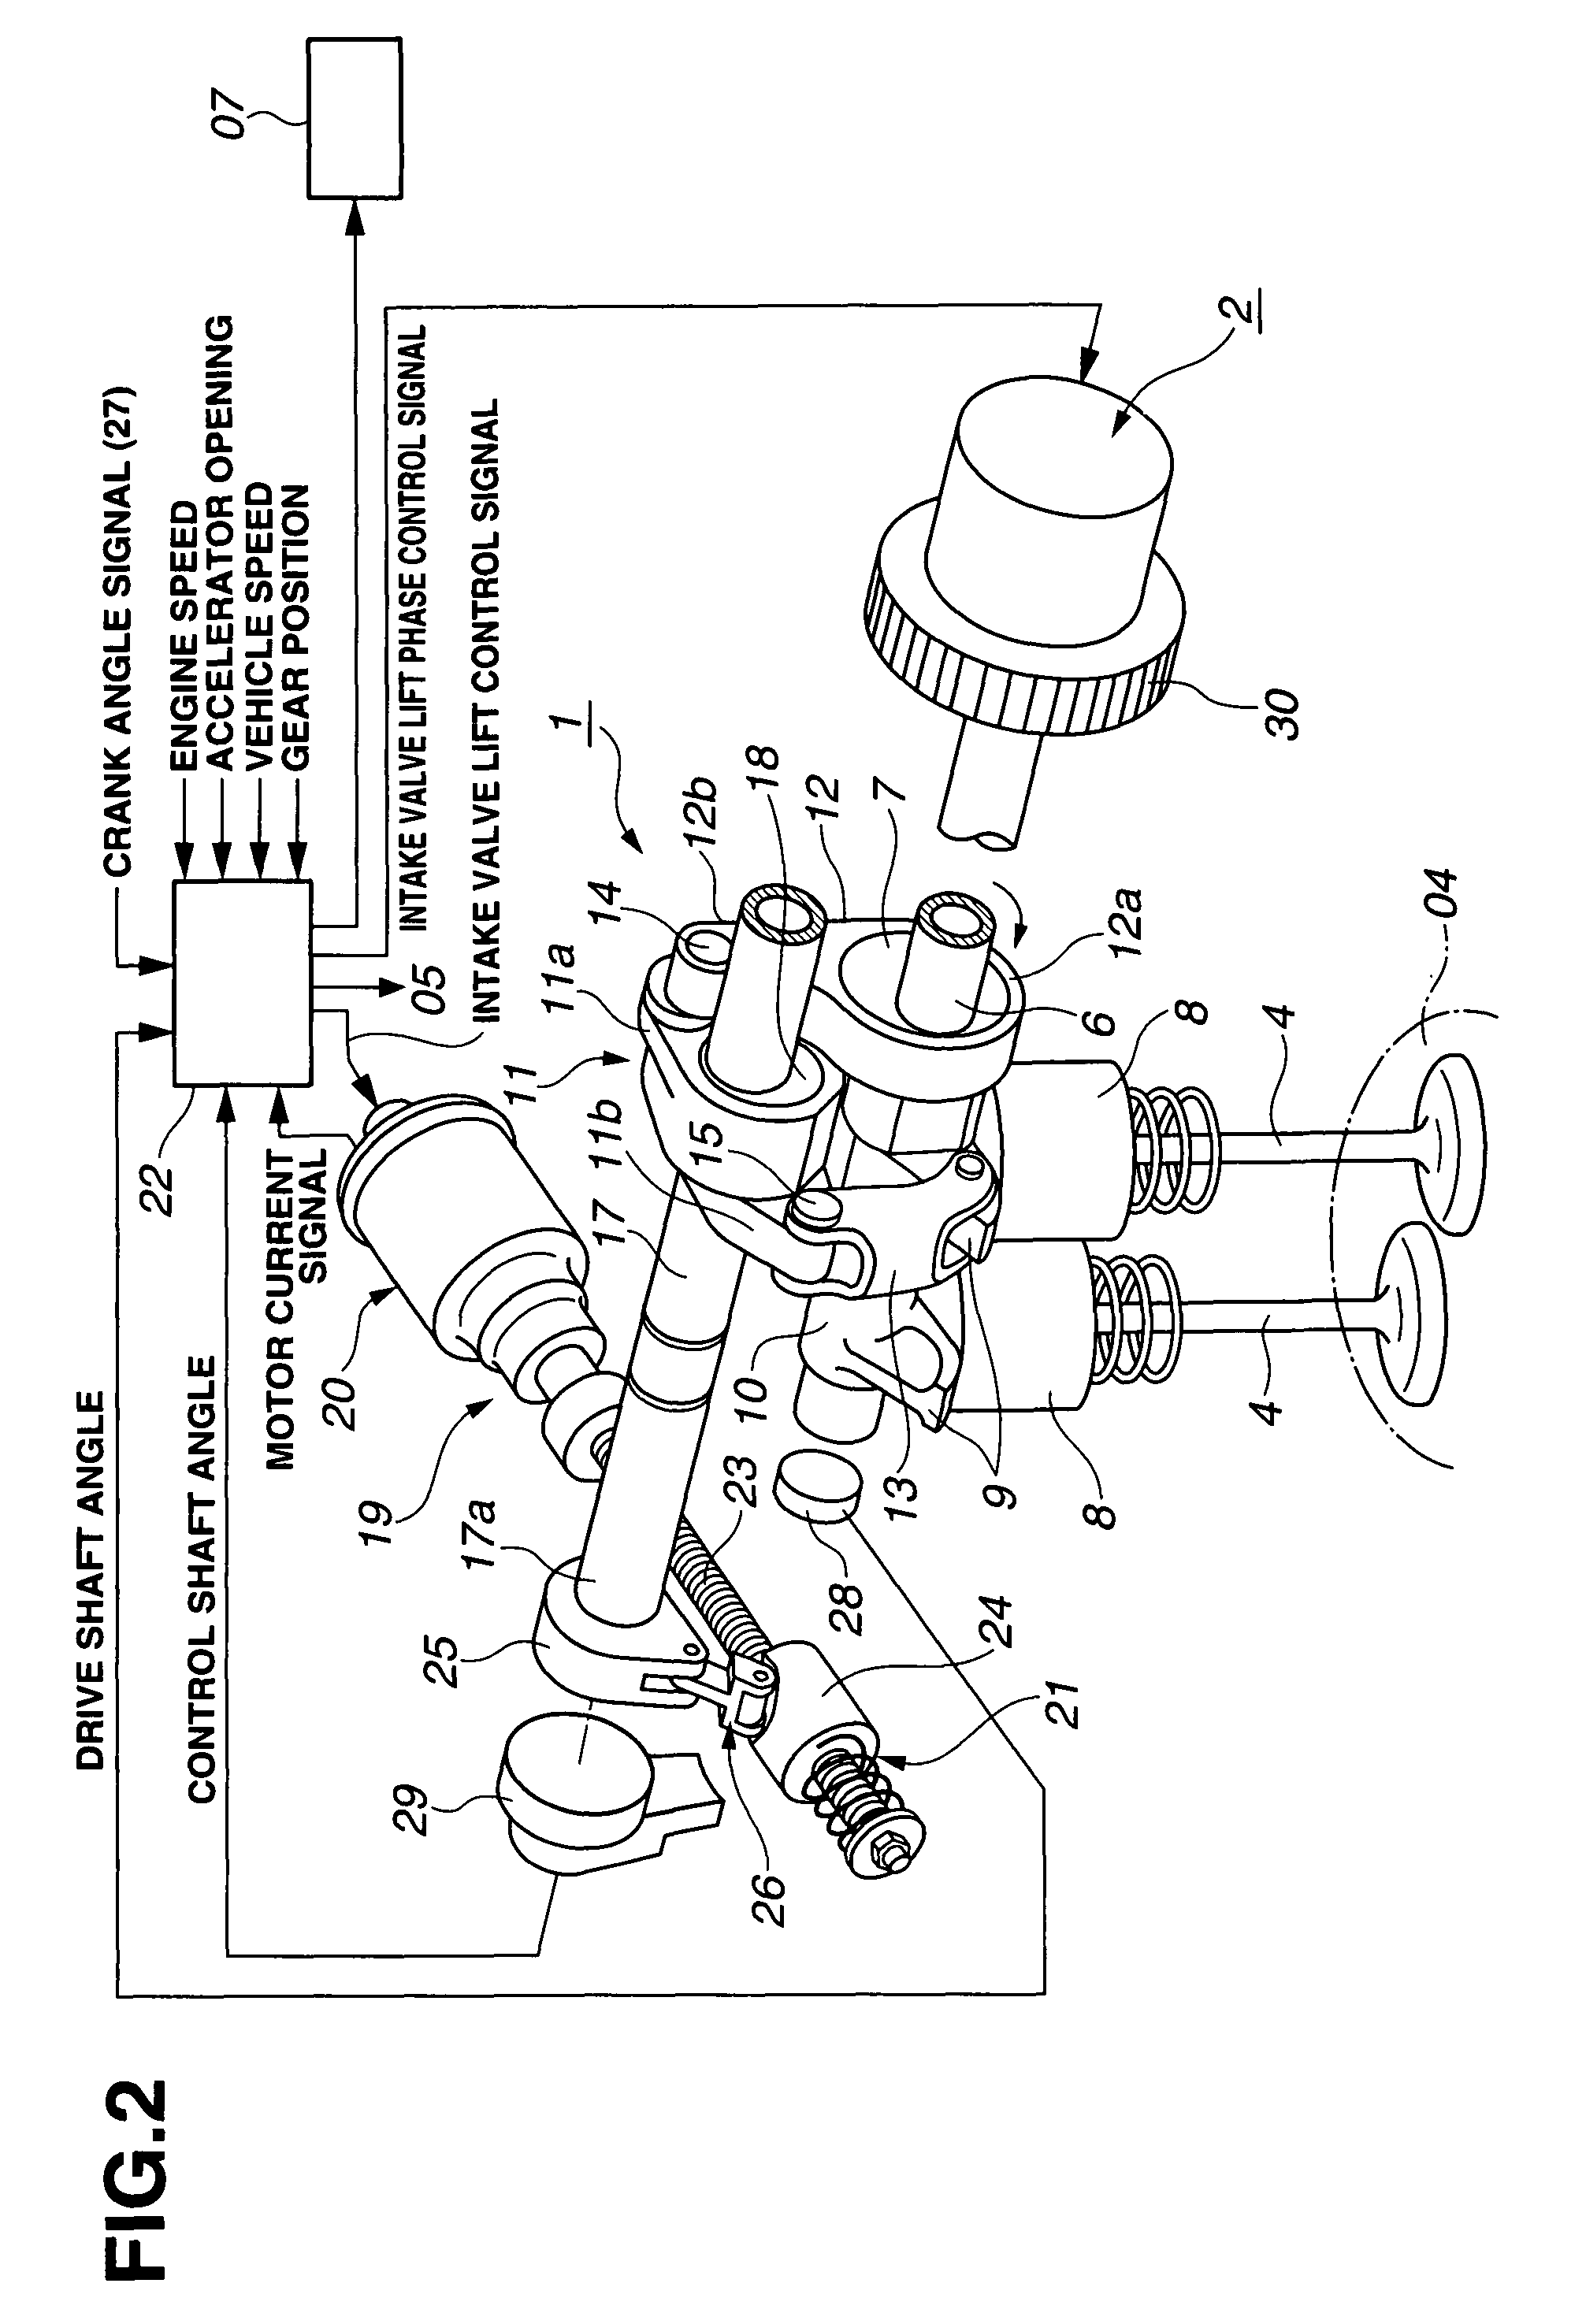 Variable valve actuating apparatus and process for internal combustion engine